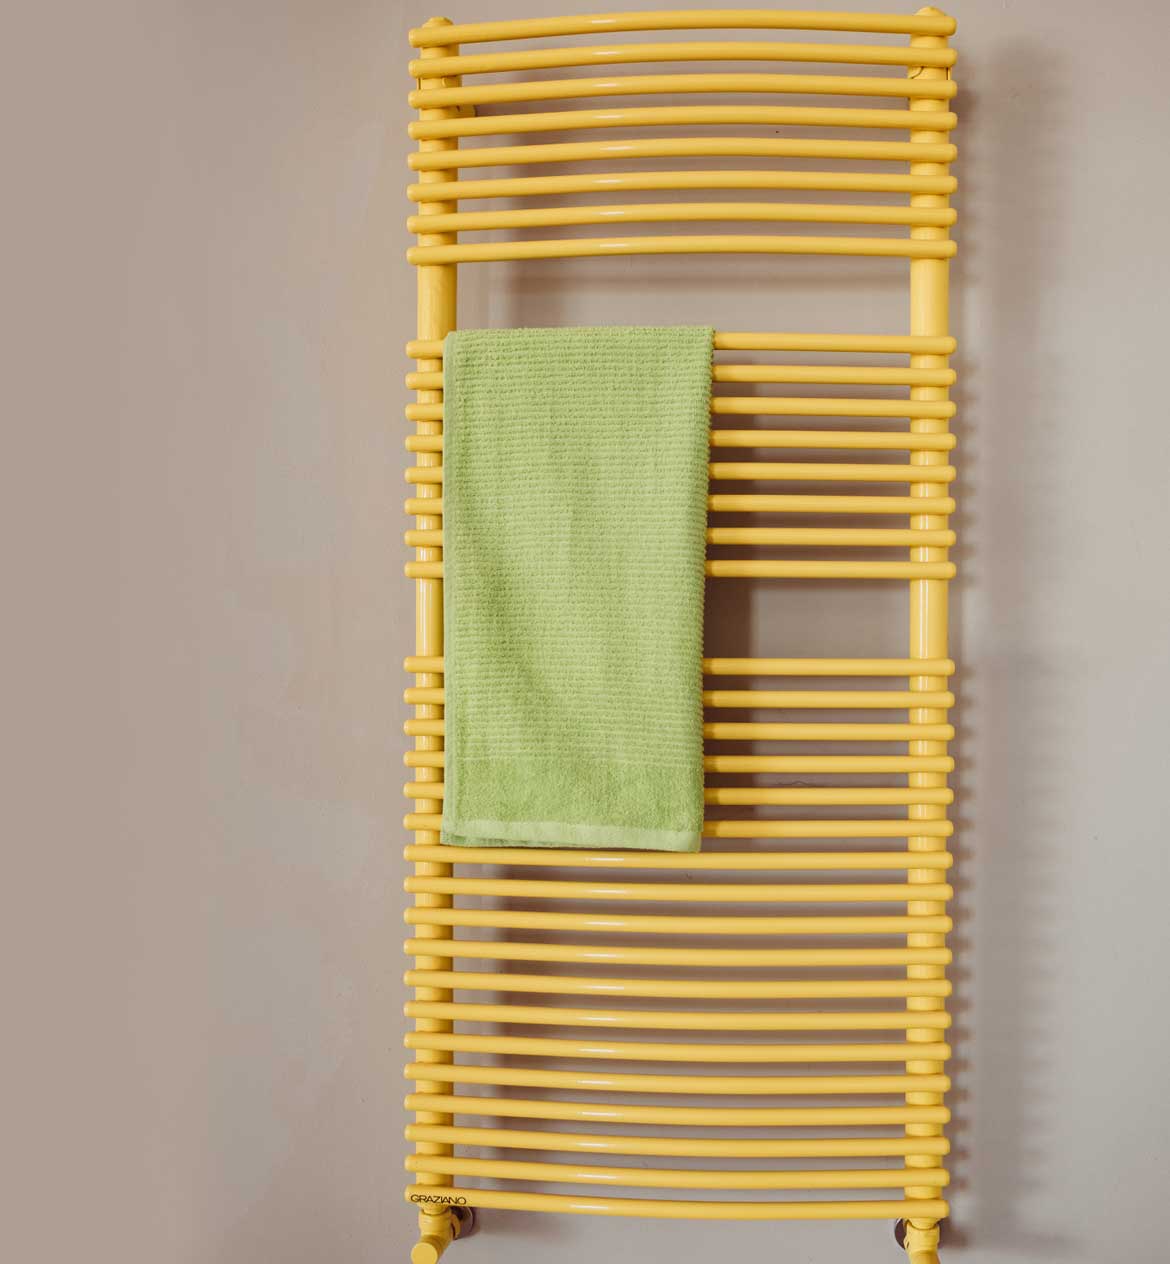 heated towel rail-miss-arco-curved-colored-graziano